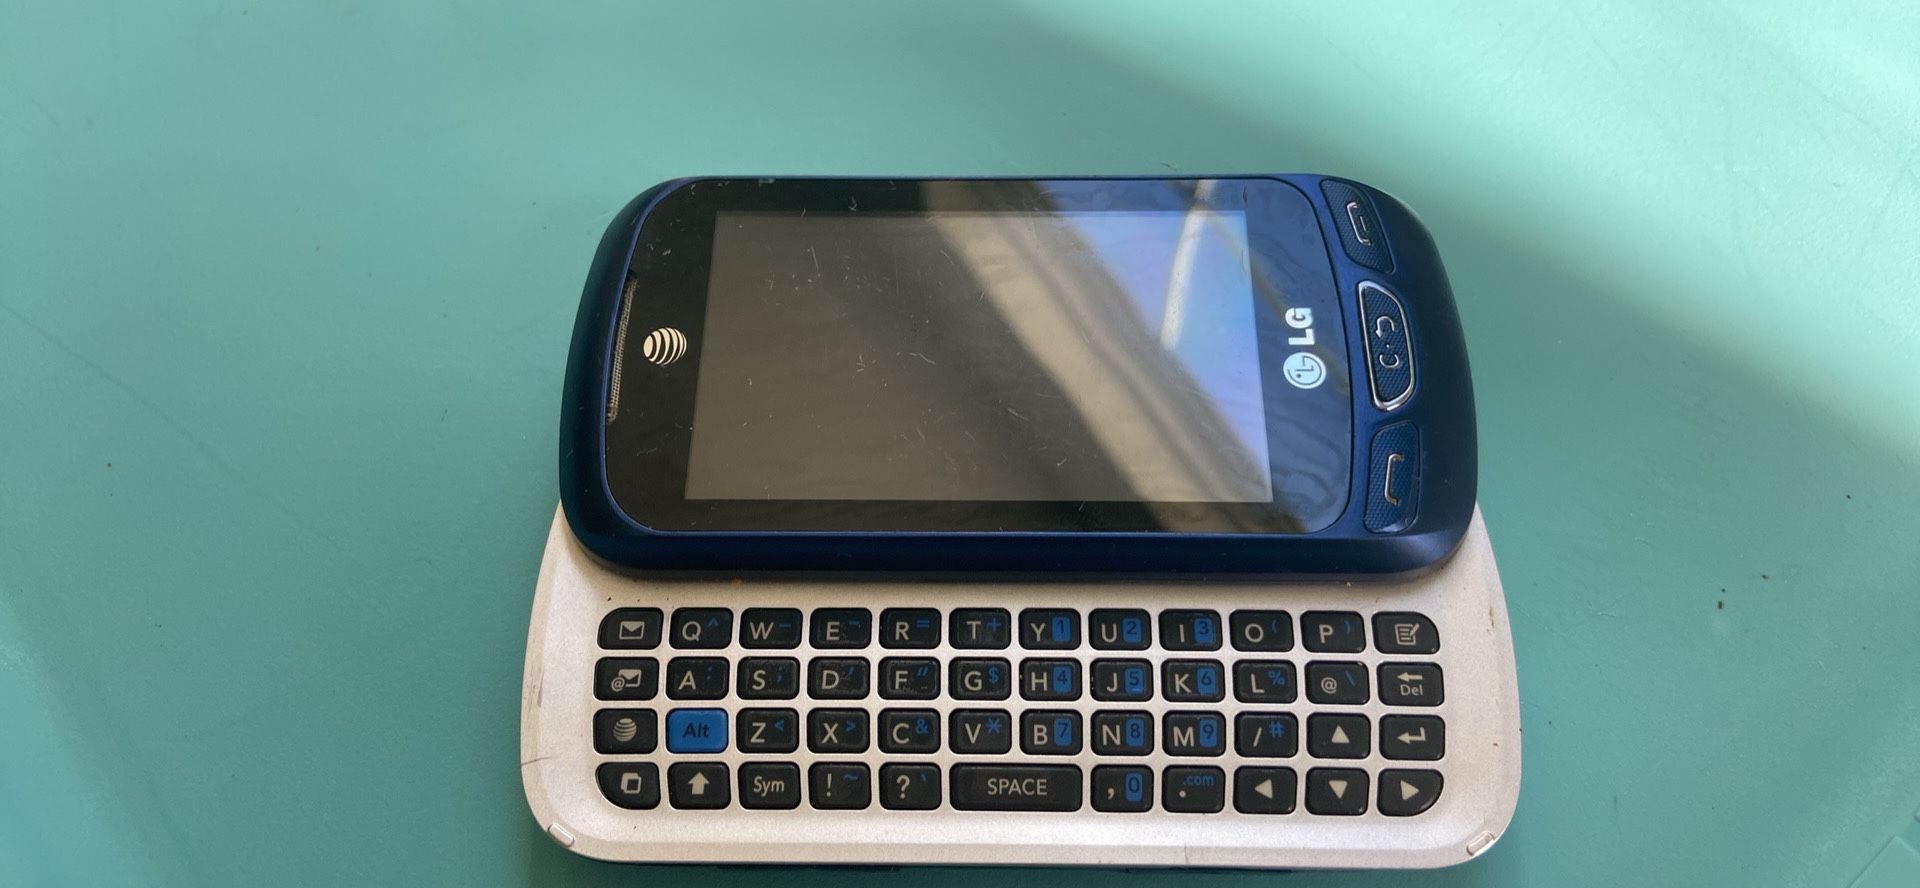 LG Xpressions 2 Slide Keyboard Cell Phone